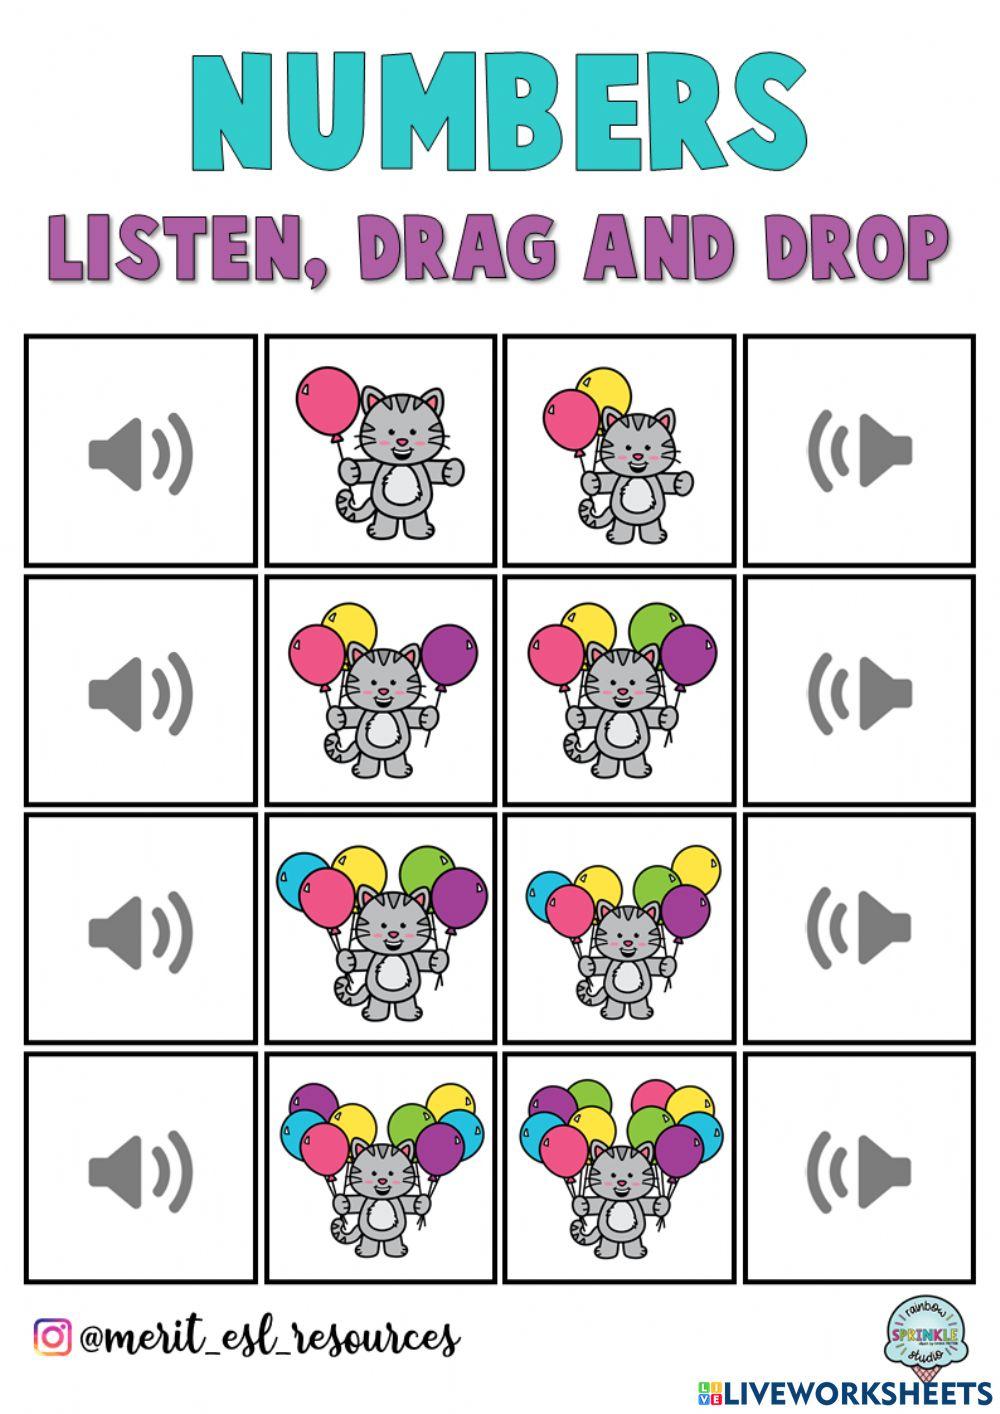 Numbers 1-10 - Listen, drag and drop